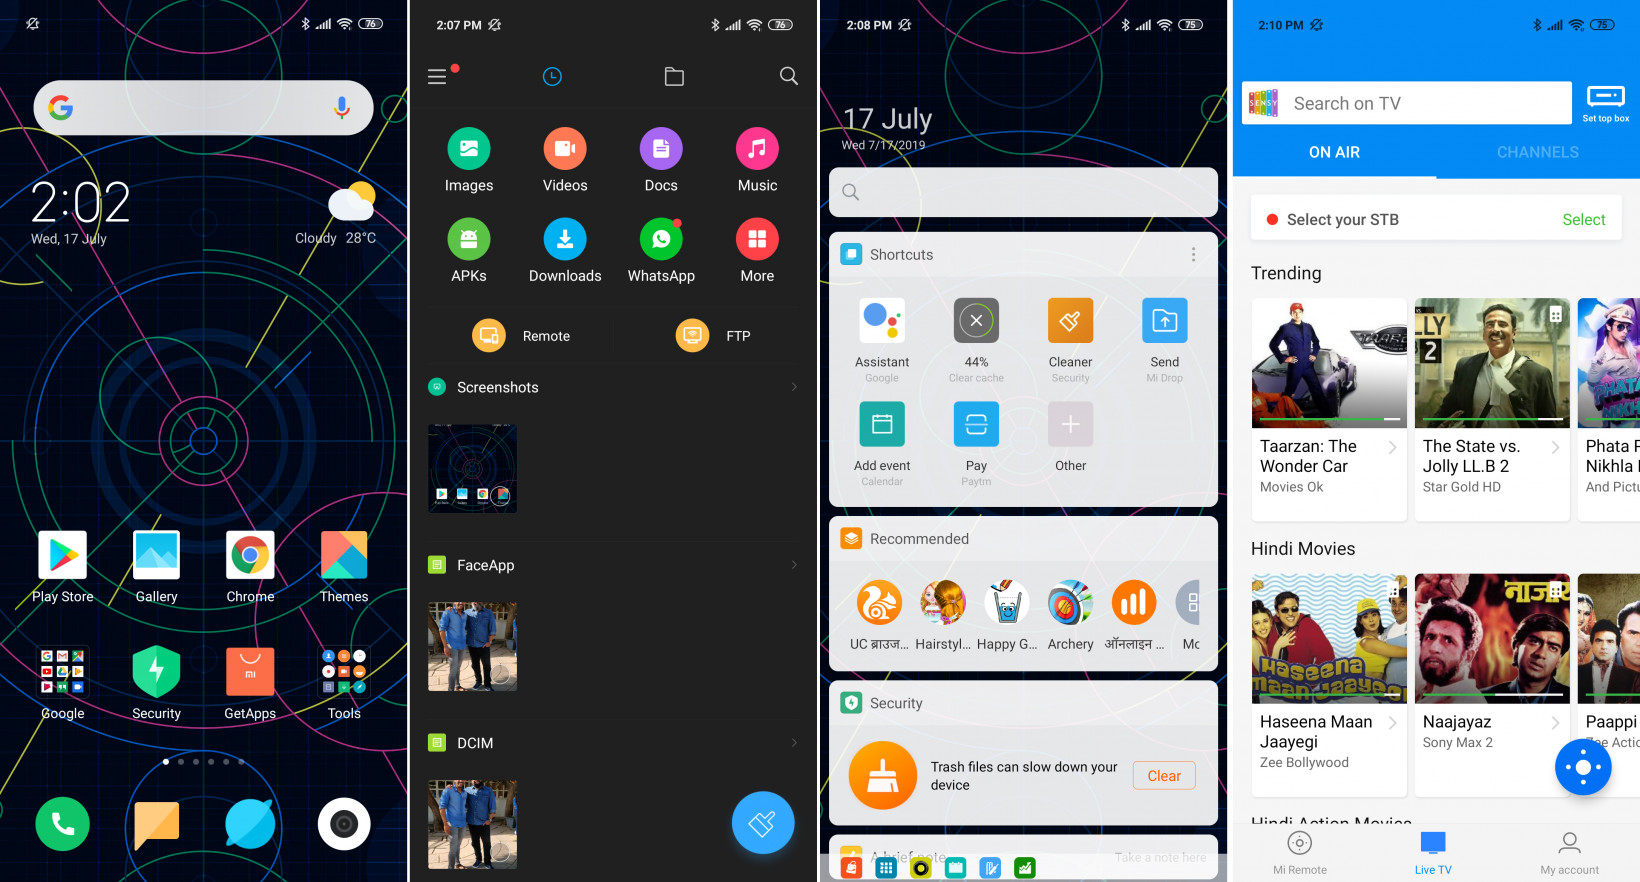 Xiaomi's MIUI 10 packs plenty of features - but also lots of bloatware, ads, and shortcuts to content you may or may enjoy